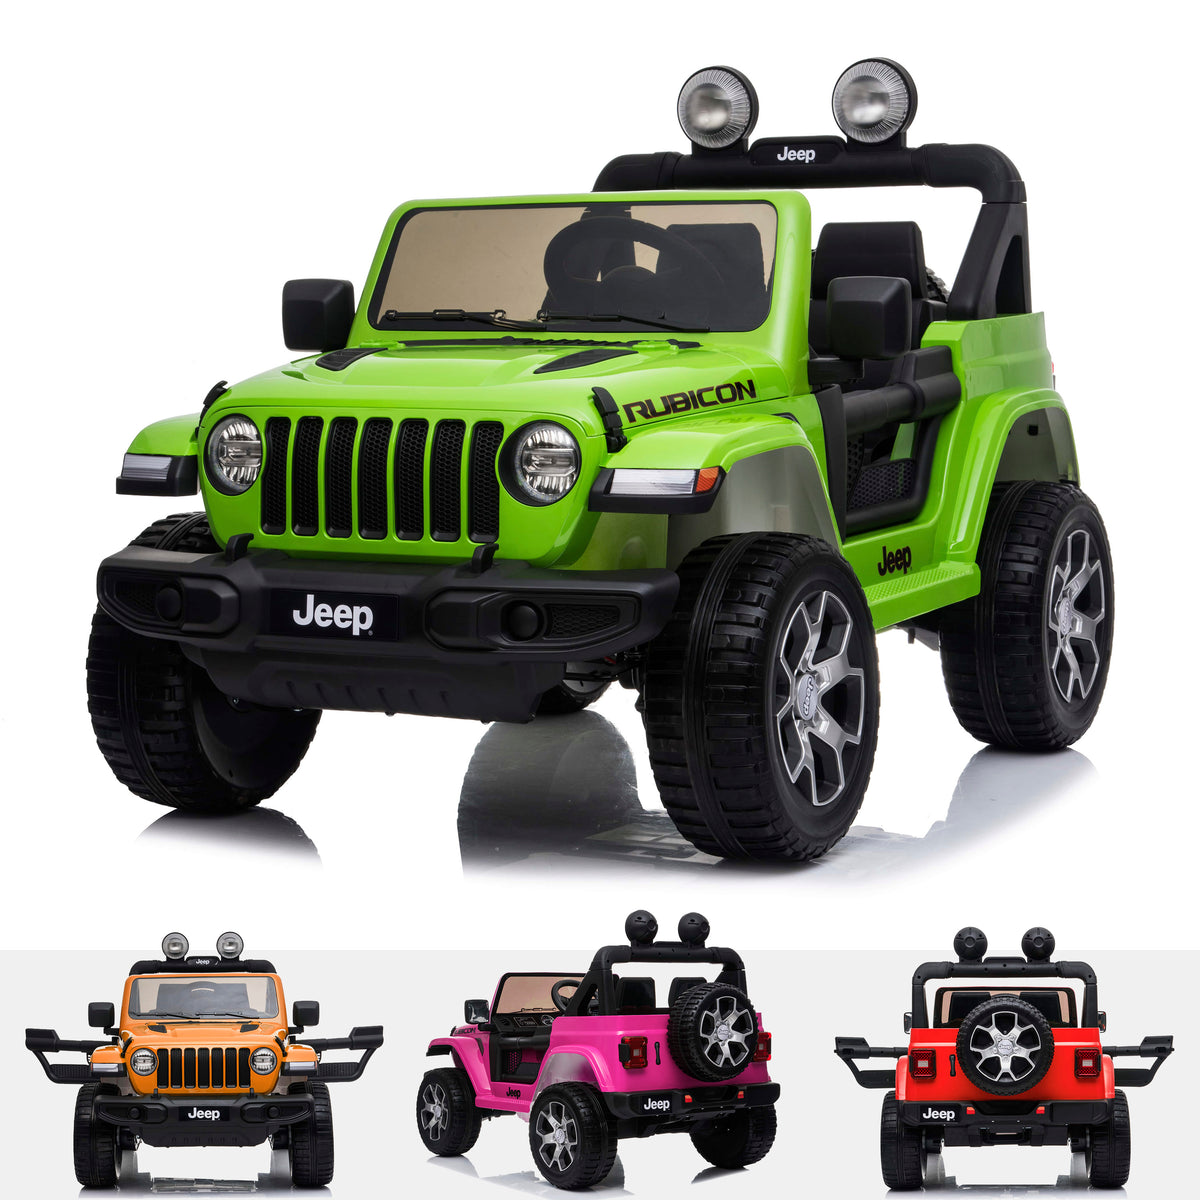 Jeep Wrangler Rubicon 12V Electric Ride On Car in Painted Green